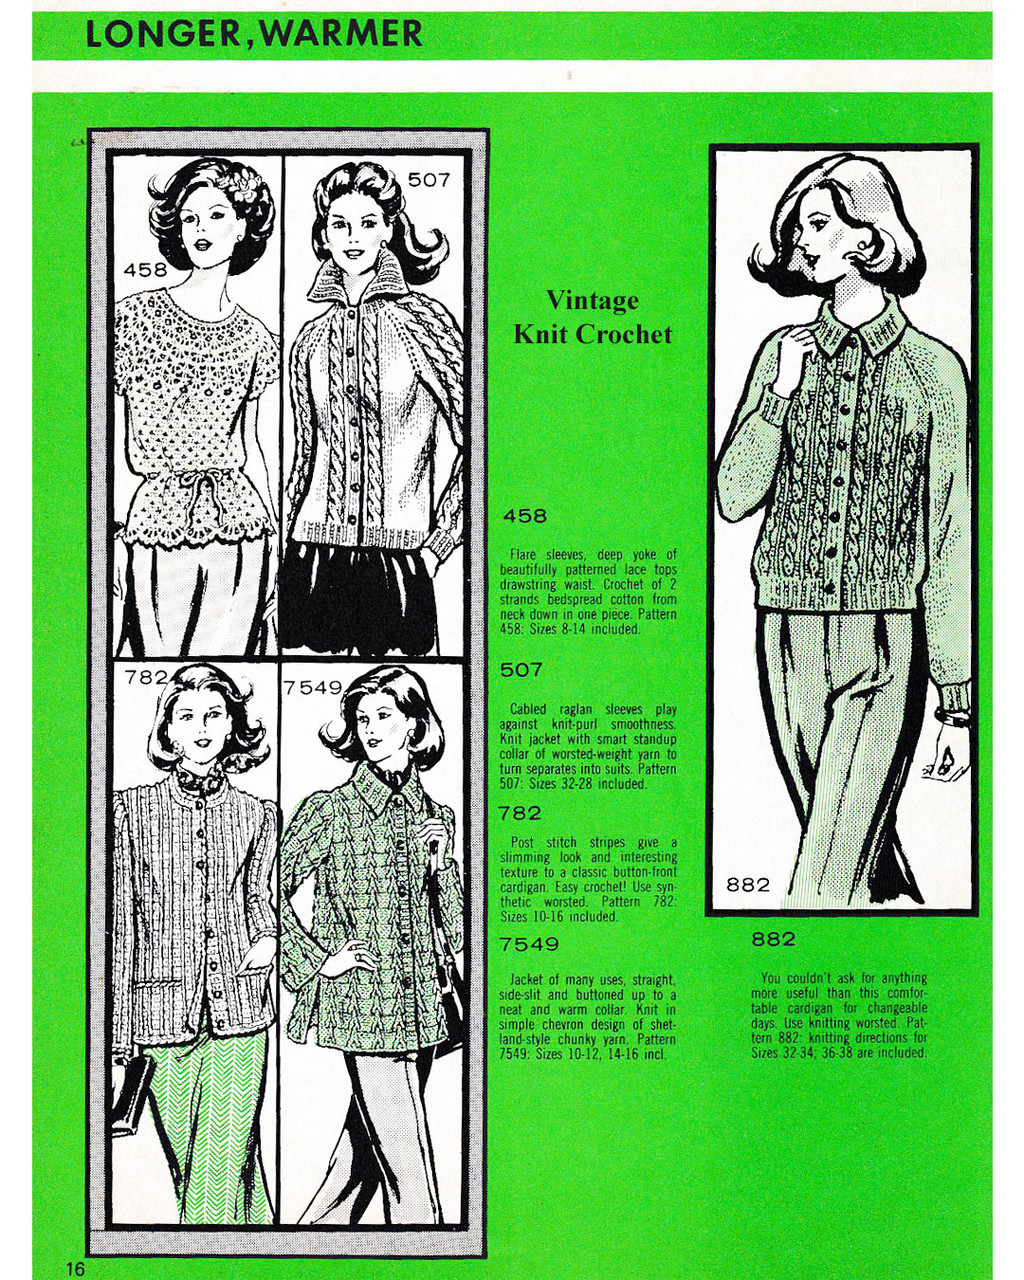 Alice Brooks Design 7459 Knitted Coat in the 1985 Needlecraft Pattern Catalog